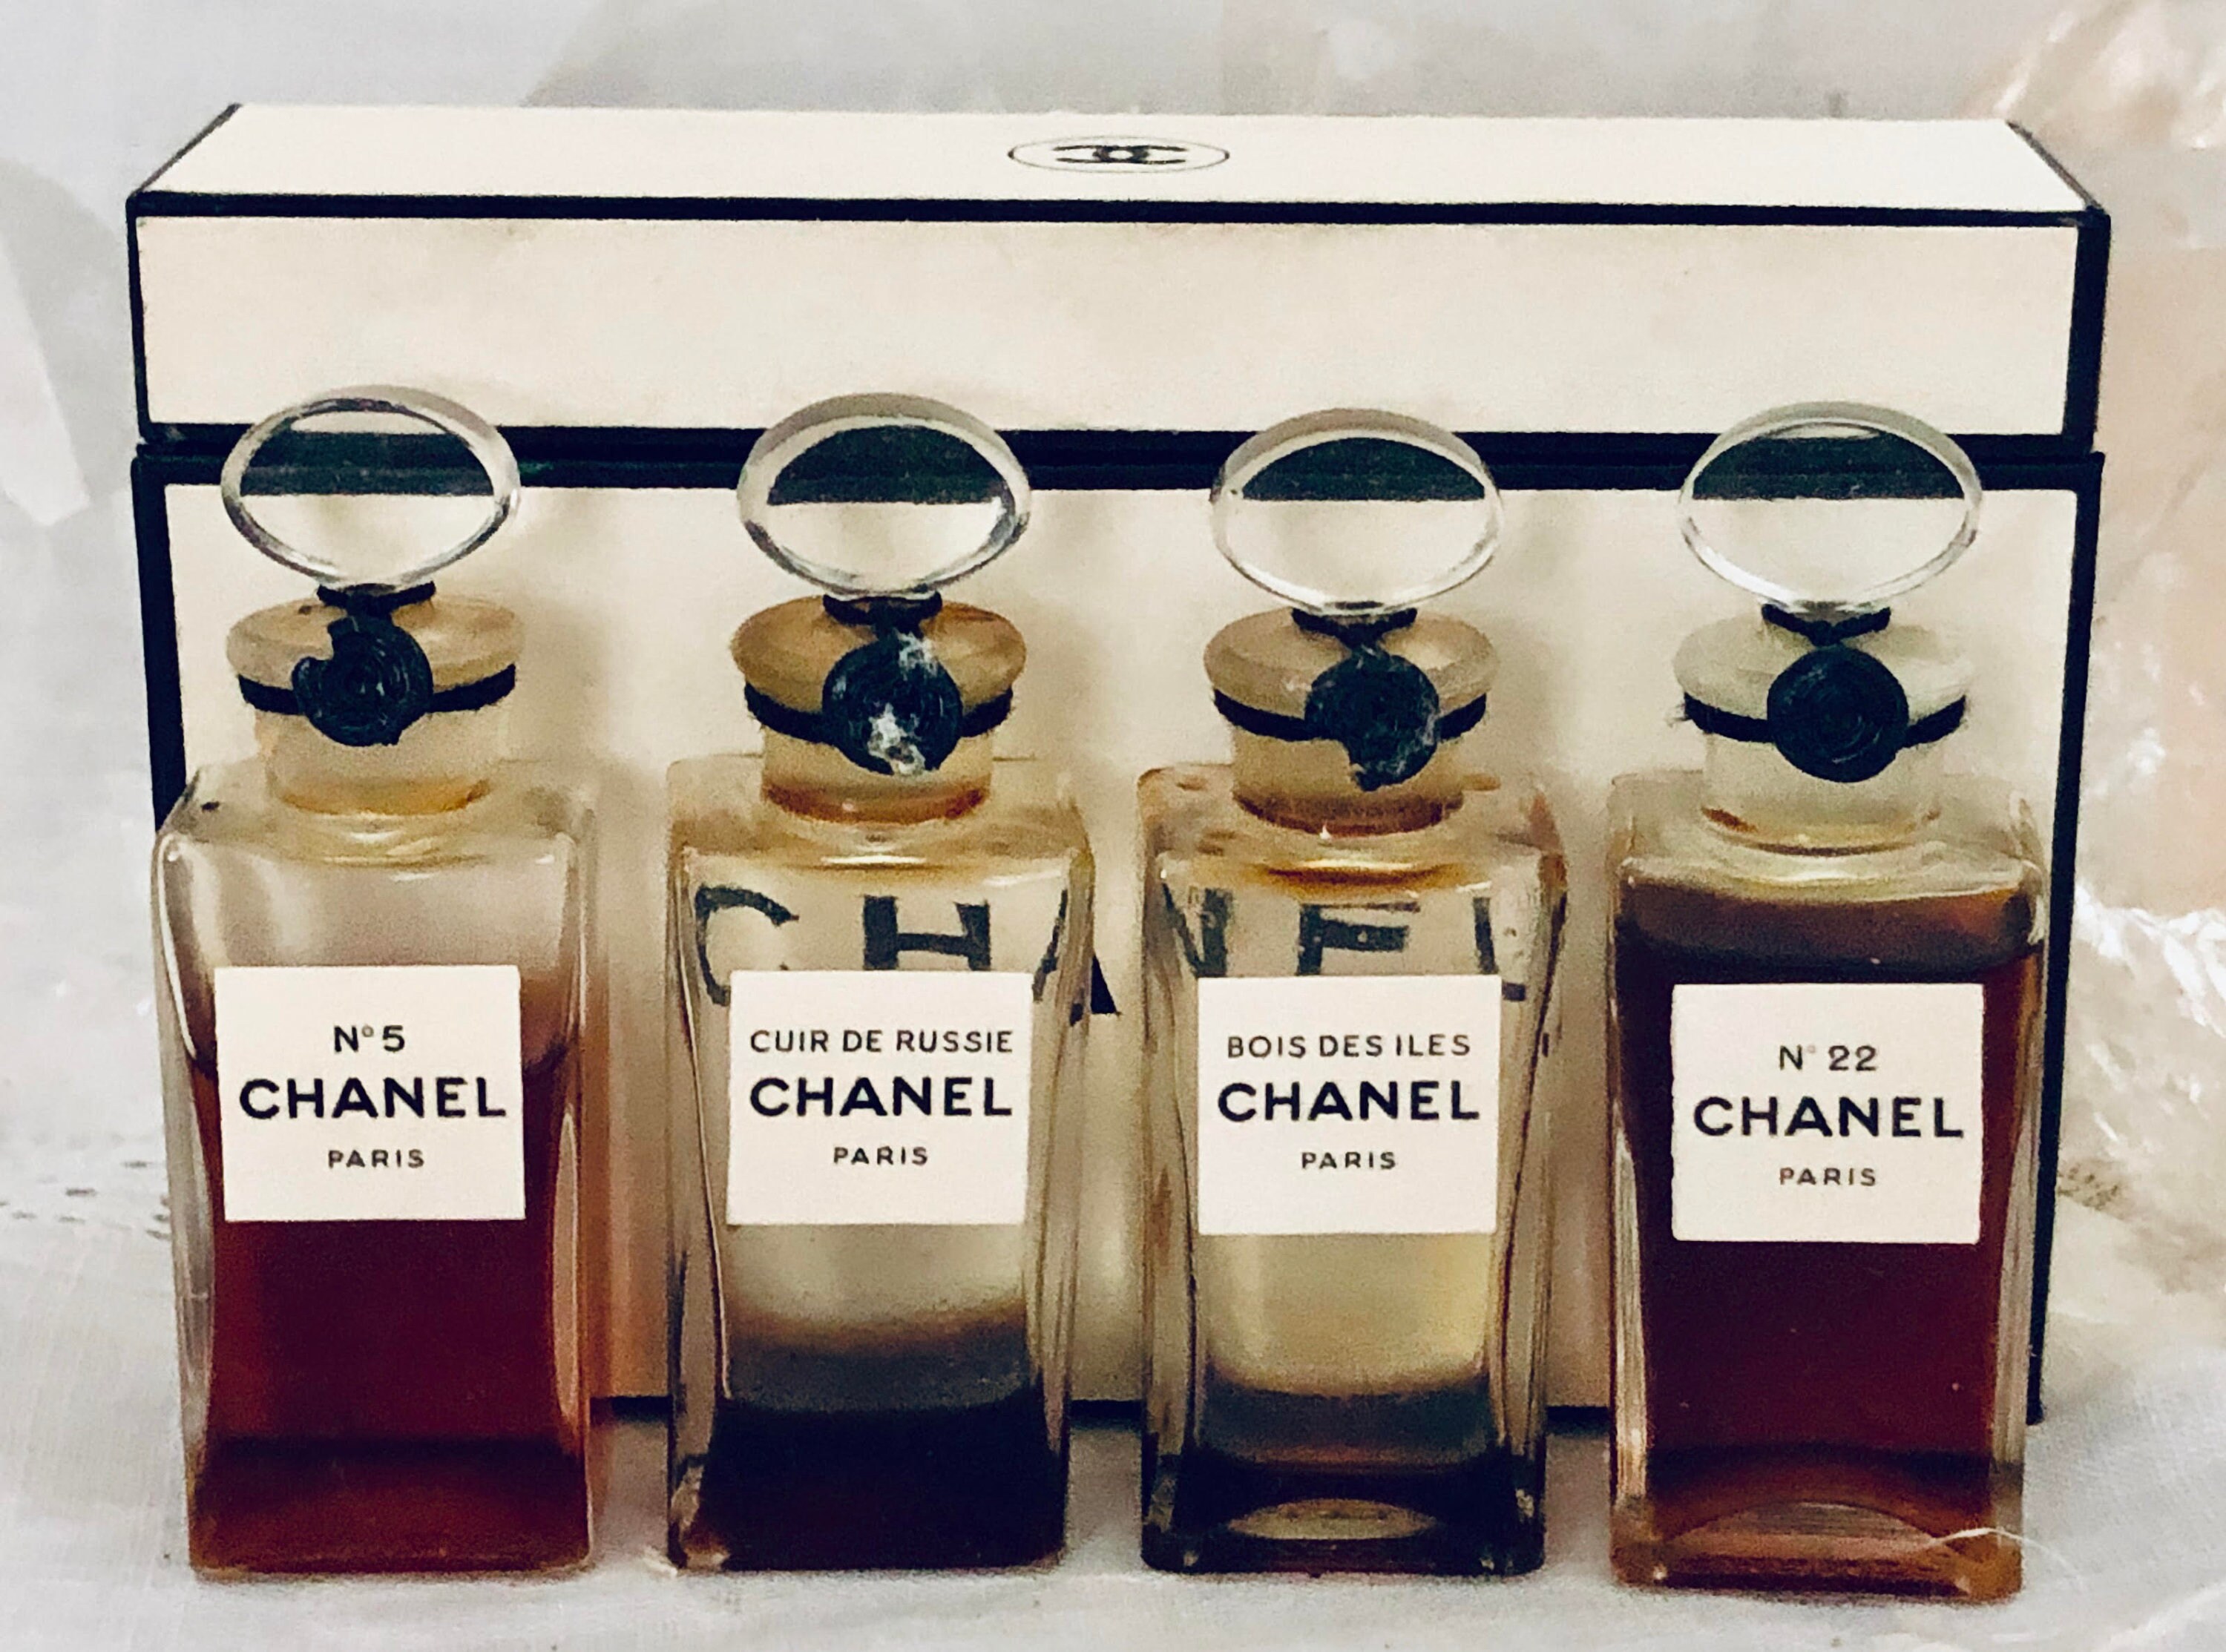 Cuir de Russie / Russia Leather by Chanel (Parfum) » Reviews